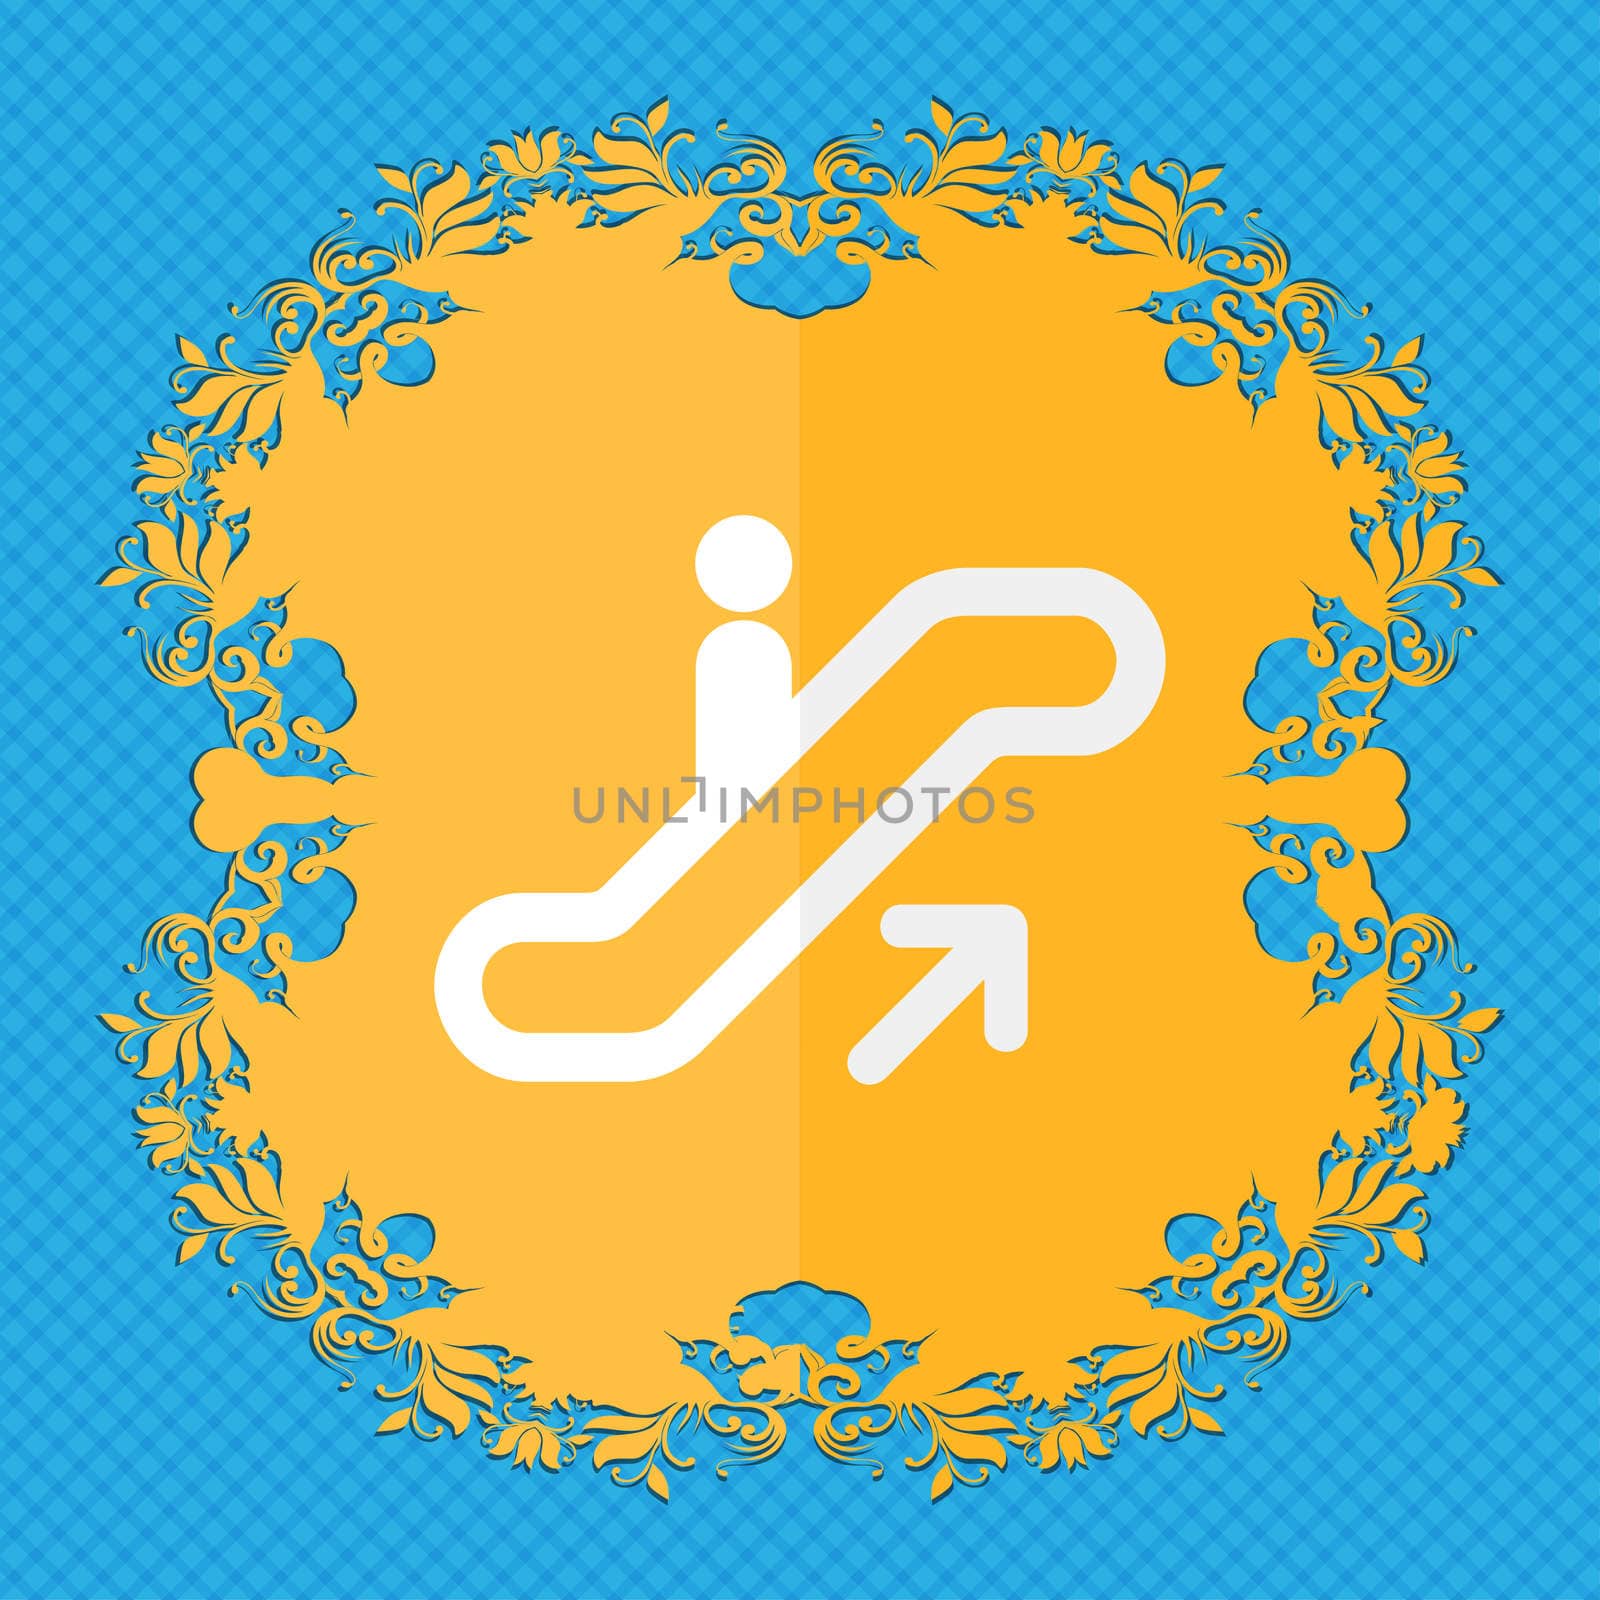 elevator, Escalator, Staircase. Floral flat design on a blue abstract background with place for your text. illustration